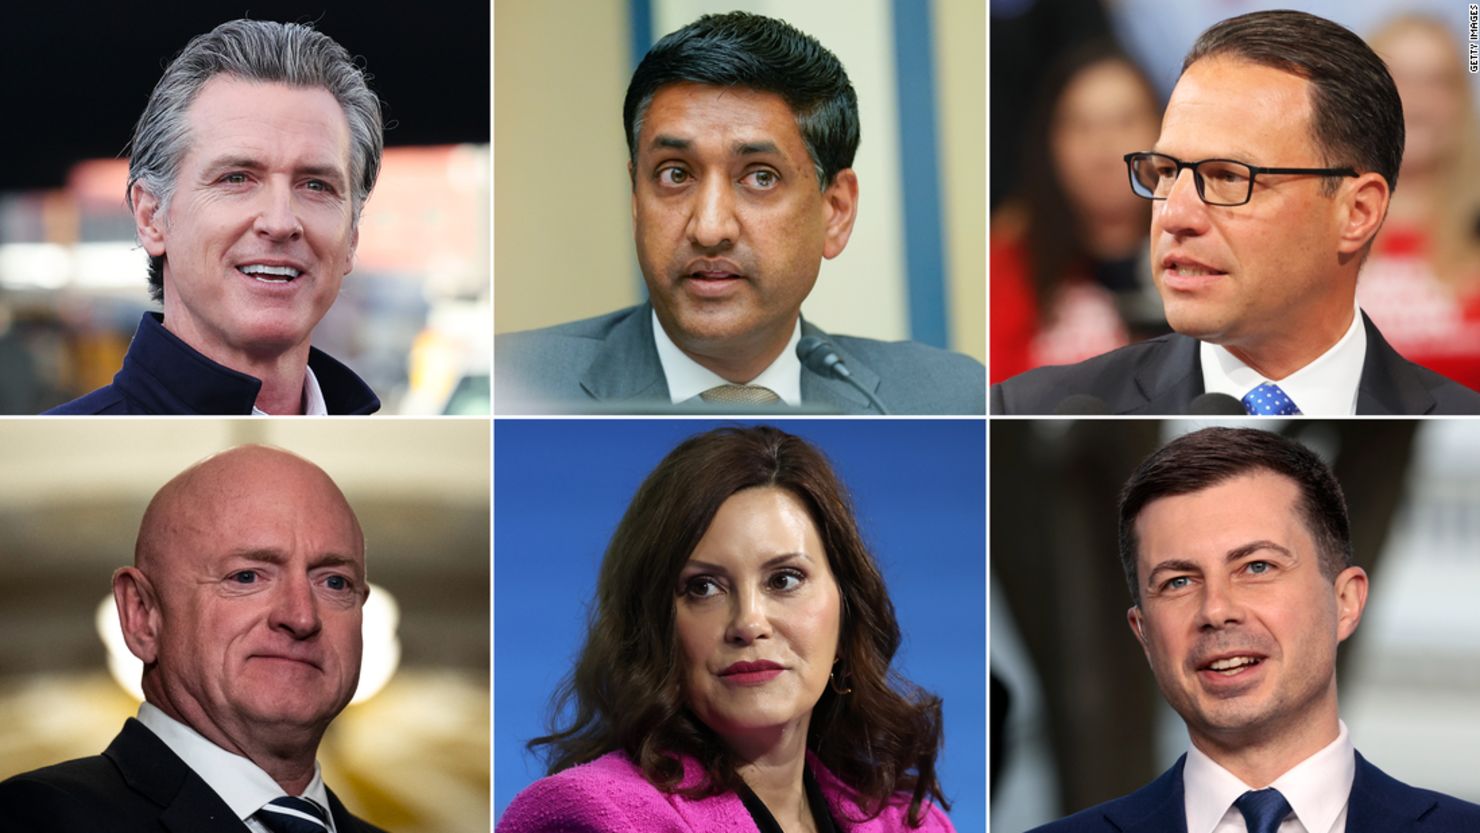 These Democrats could be contenders for their party’s nomination 2028